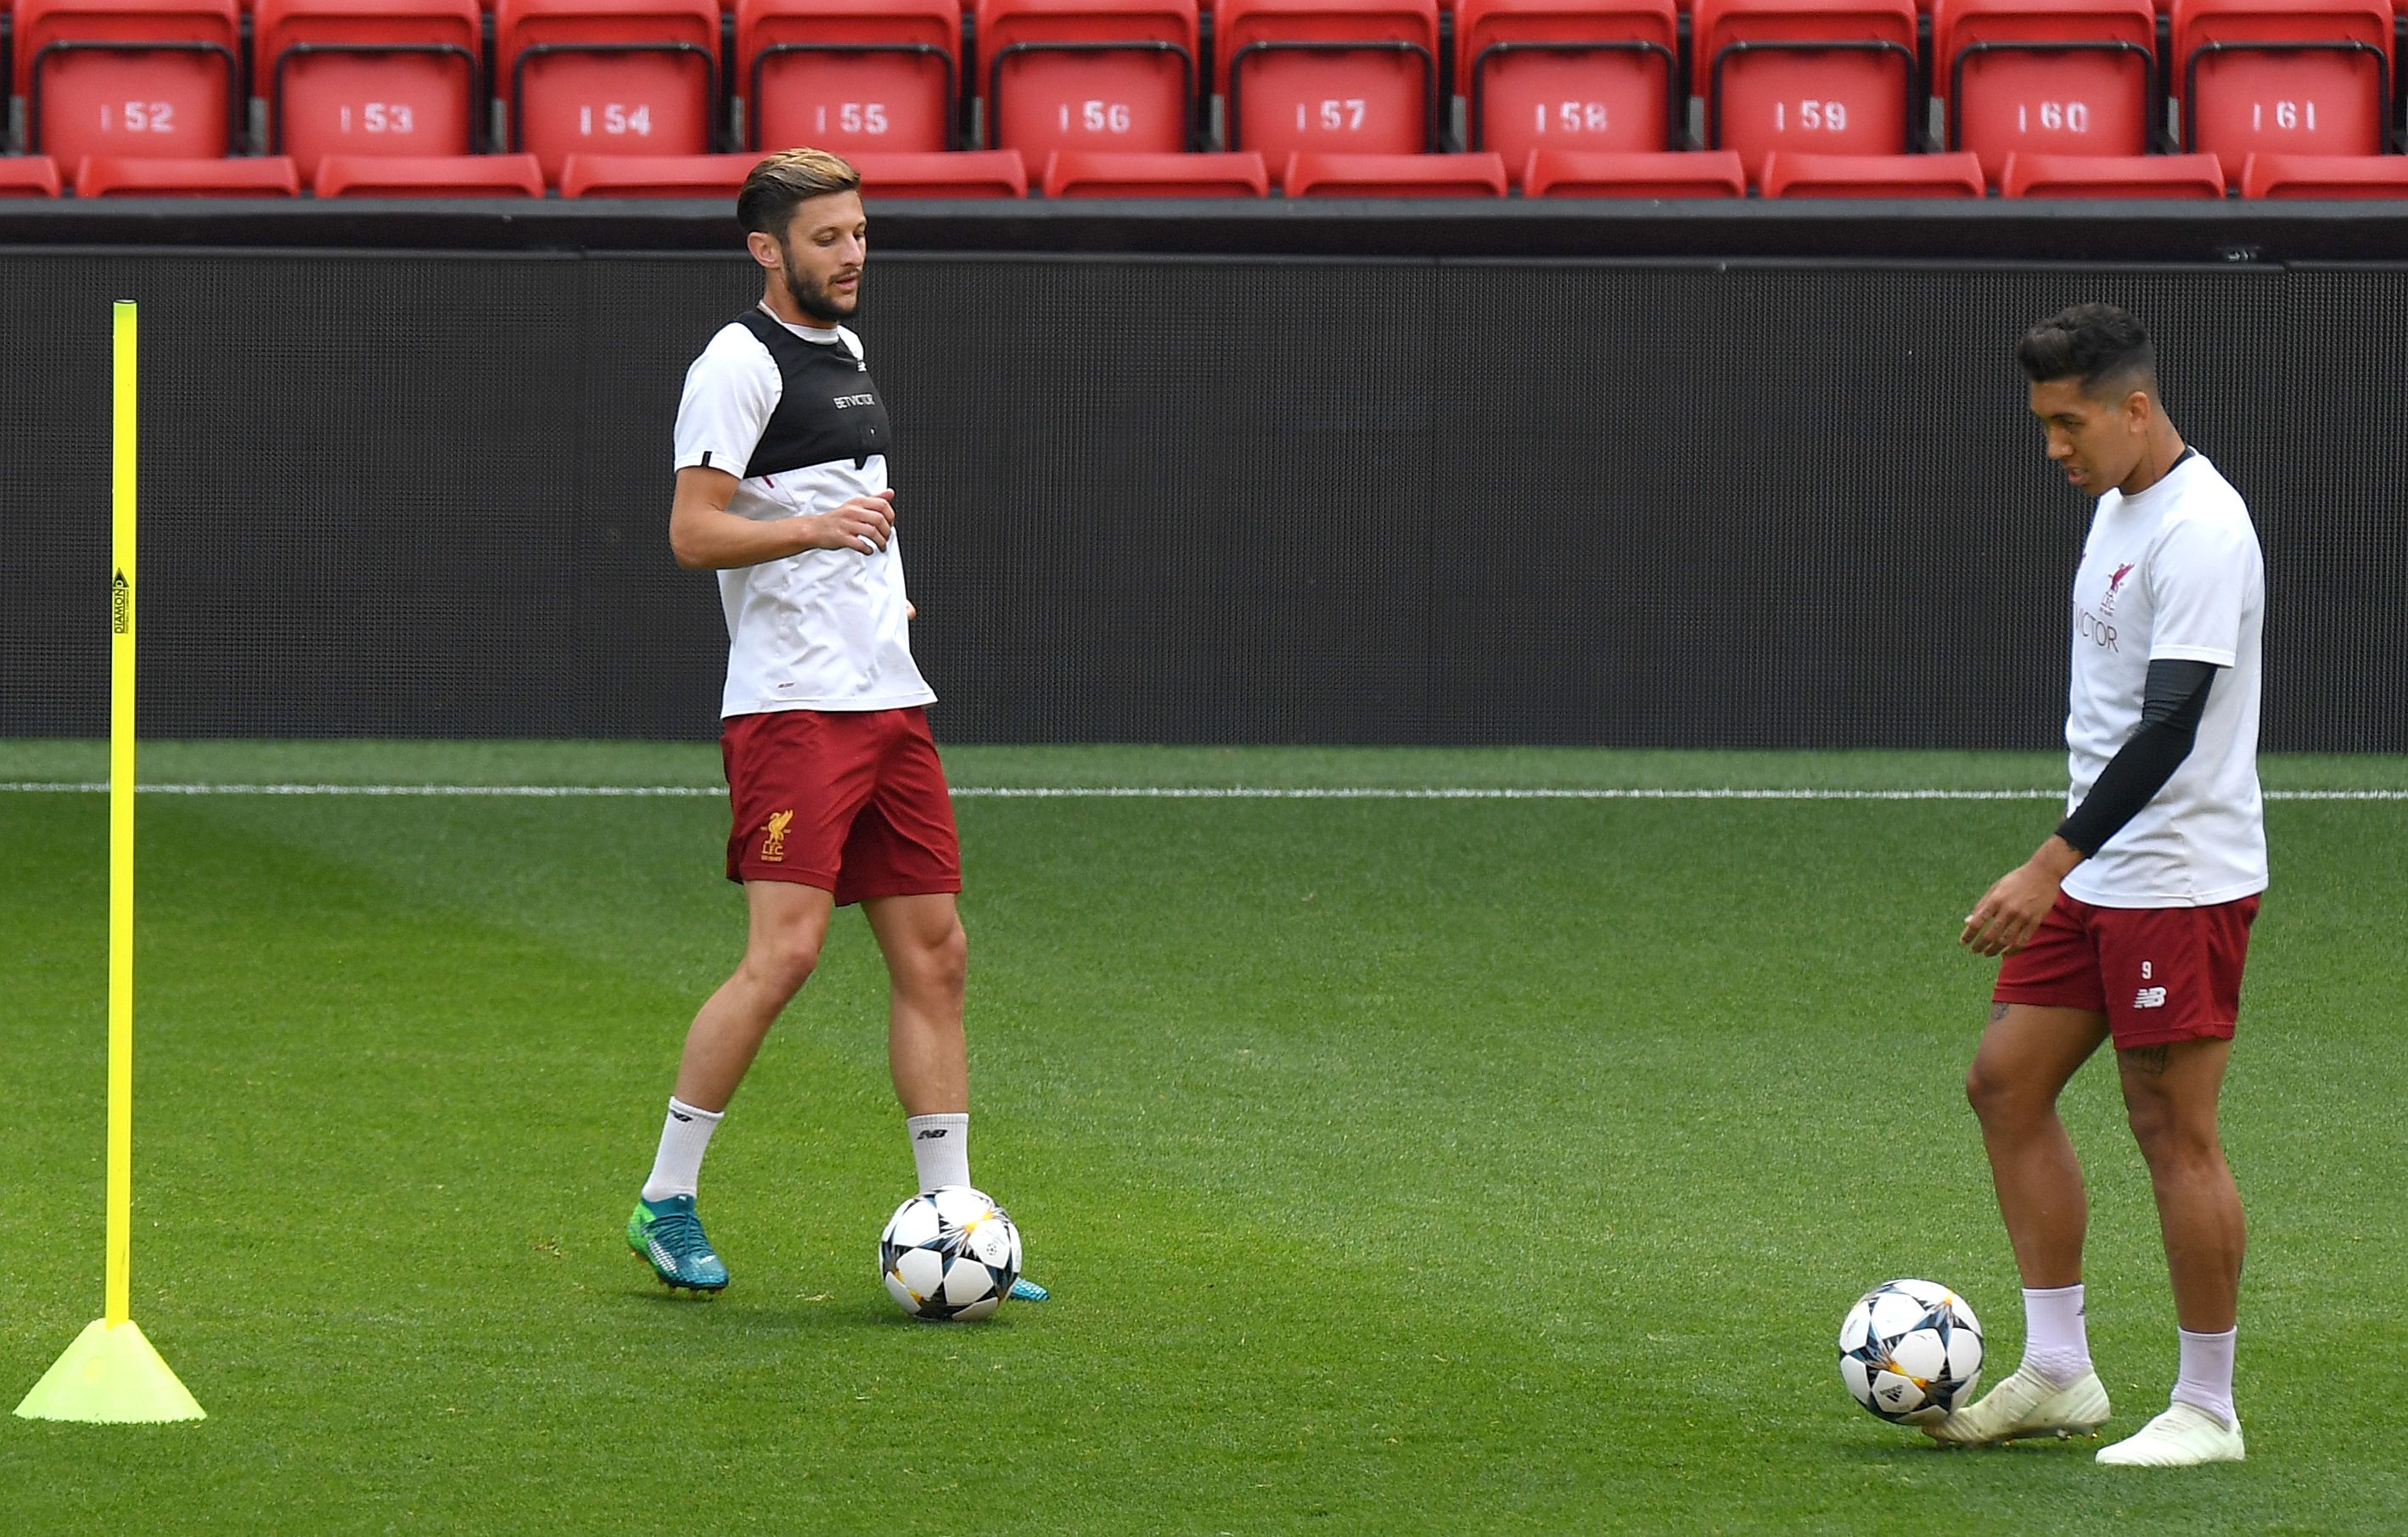 Liverpool's English midfielder Adam Lallana (L) and Liverpool's Brazilian midfielder Roberto Firmino attend a training session and media day at Anfield stadium in Liverpool, north west England on May 21, 2018, ahead of their UEFA Champions League final football match against Real Madrid in Kiev on May 26. (Photo by Paul ELLIS / AFP)        (Photo credit should read PAUL ELLIS/AFP/Getty Images)